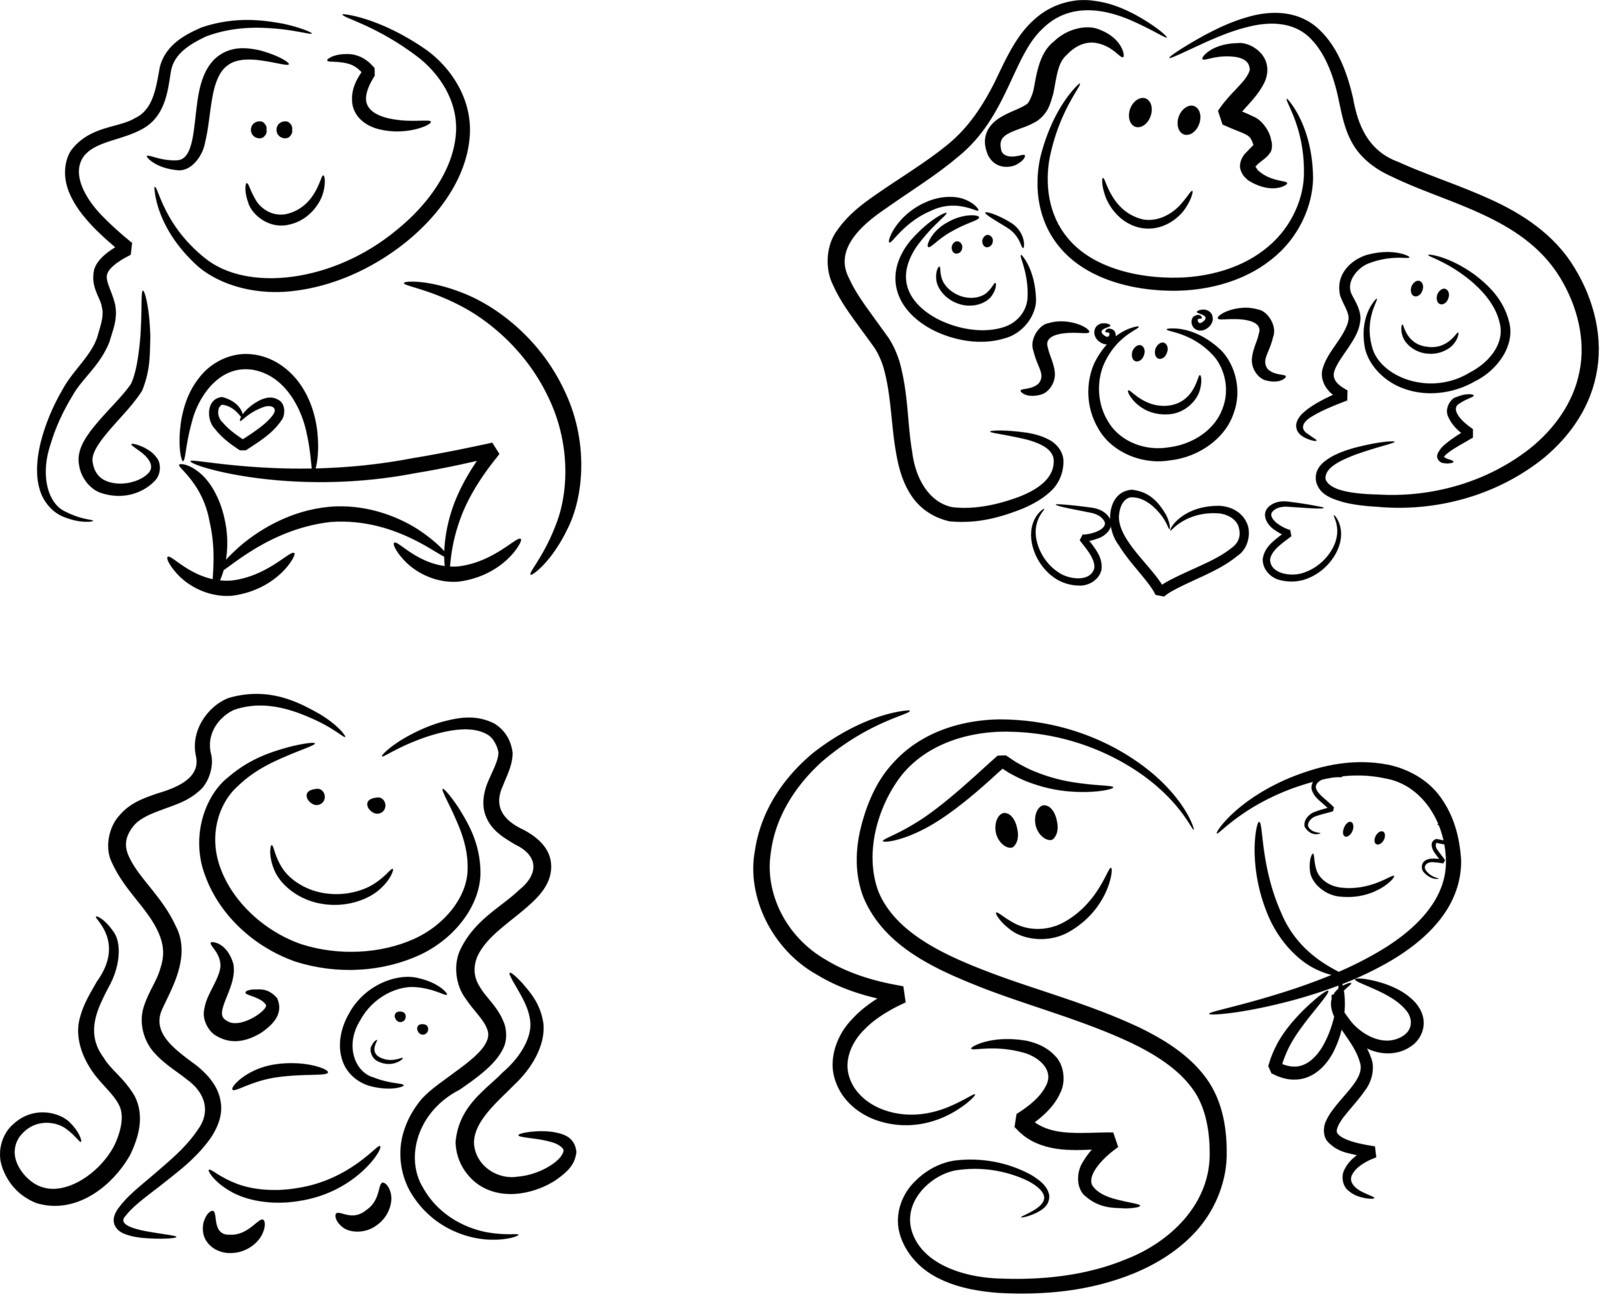 Collection of four black-and-white icons representing motherly love: Pregnant mom looking forward to her baby's birth, mom and kids, mom and baby